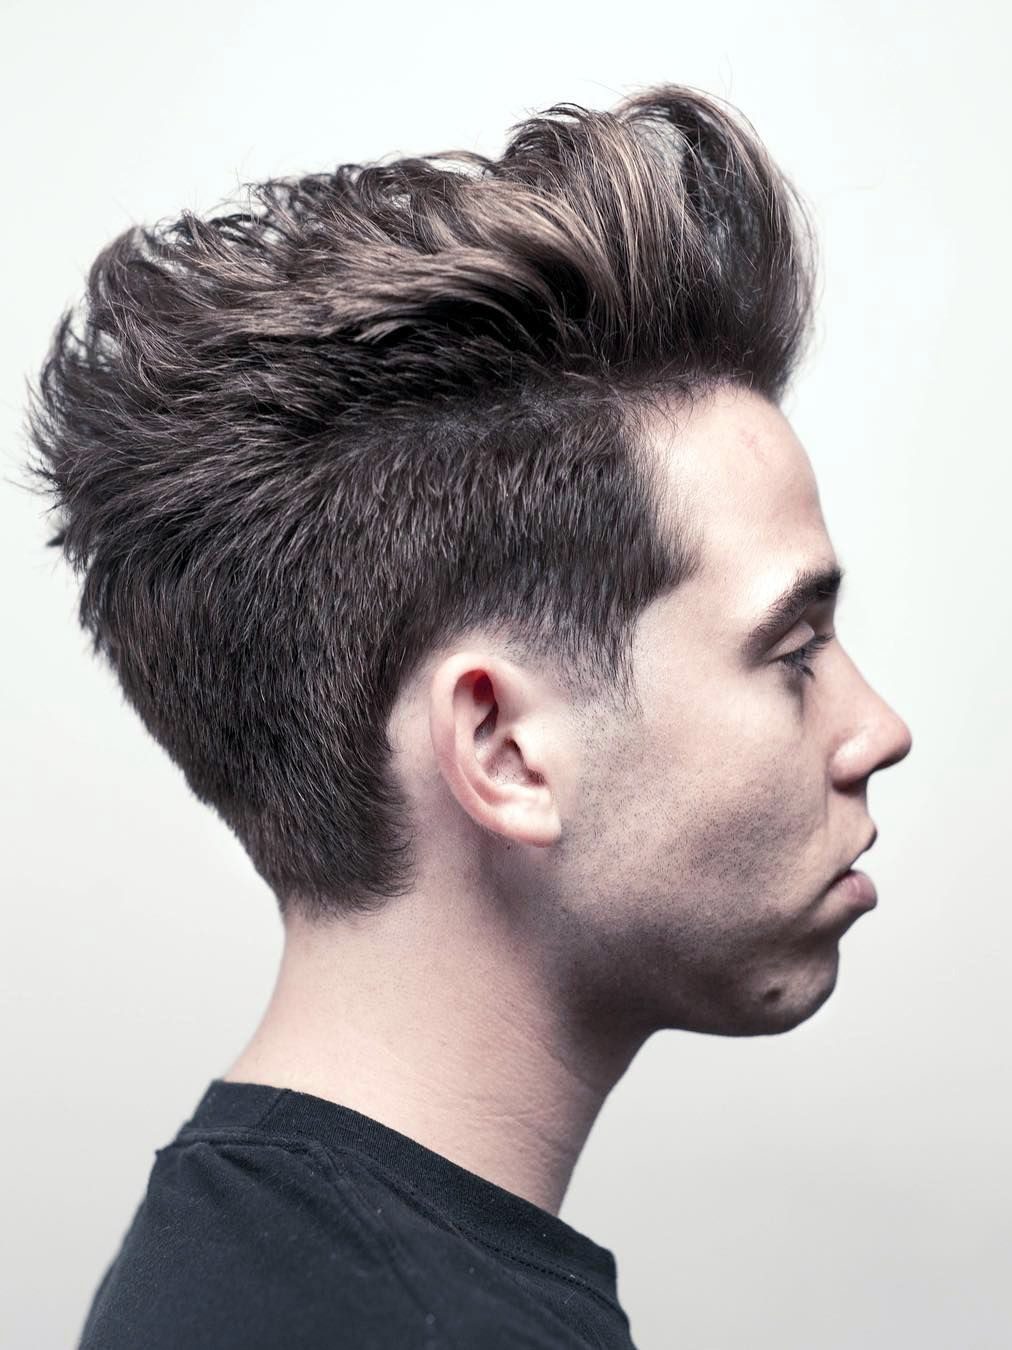 100 Best Hairstyles for Teenage Boys - The Ultimate Guide ...